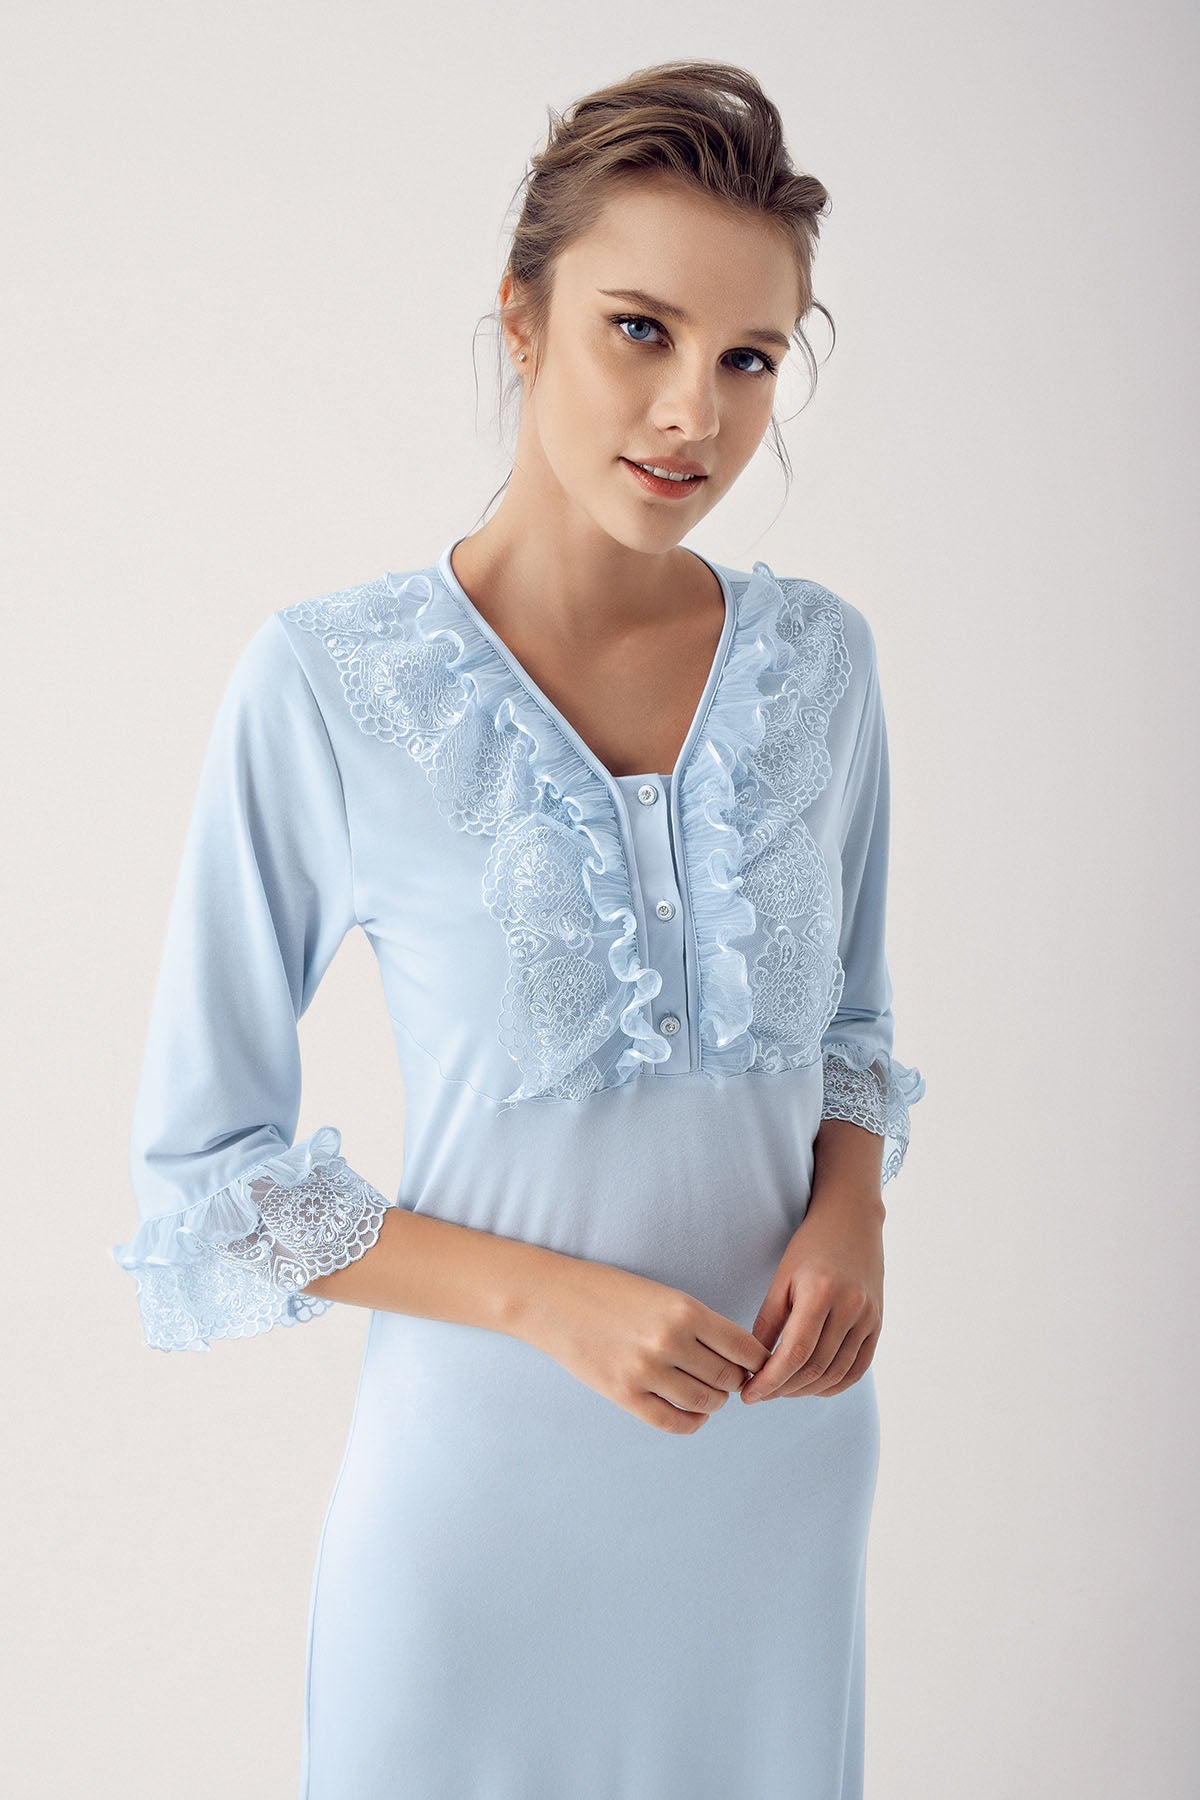 Shopymommy 14403 Leaf Lace Maternity & Nursing Nightgown With Robe Blue